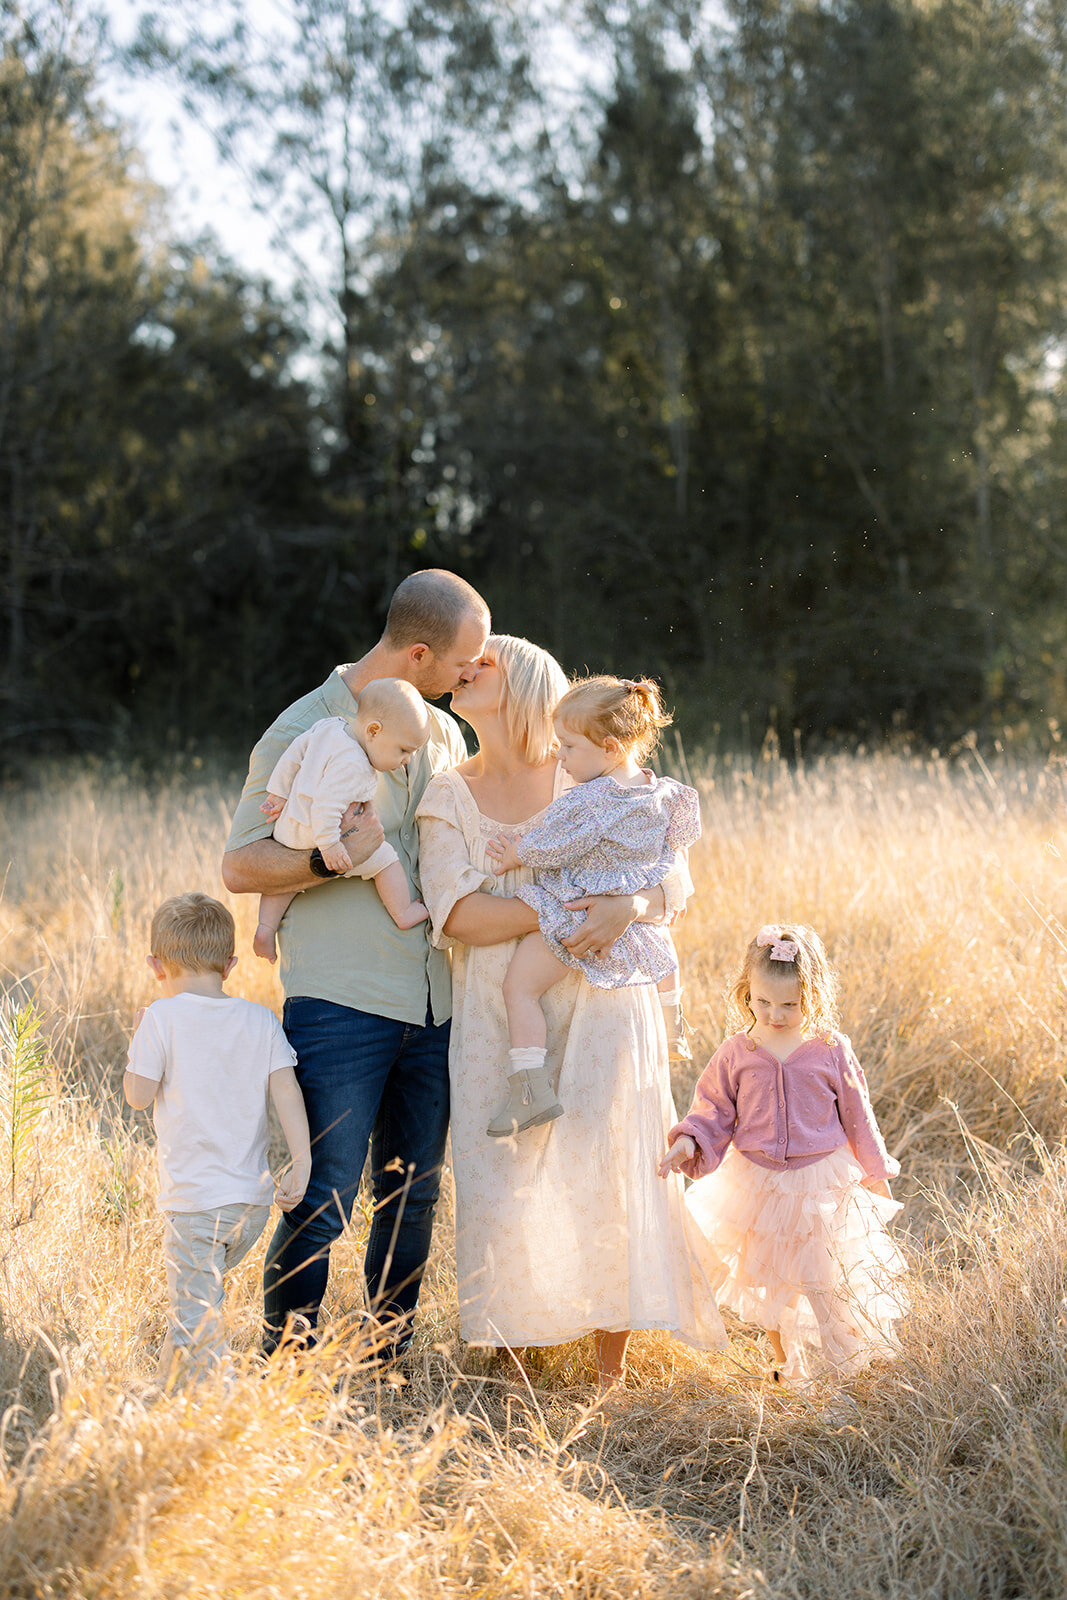 Mum and Dad kissing in the golden grass surrounded by four children